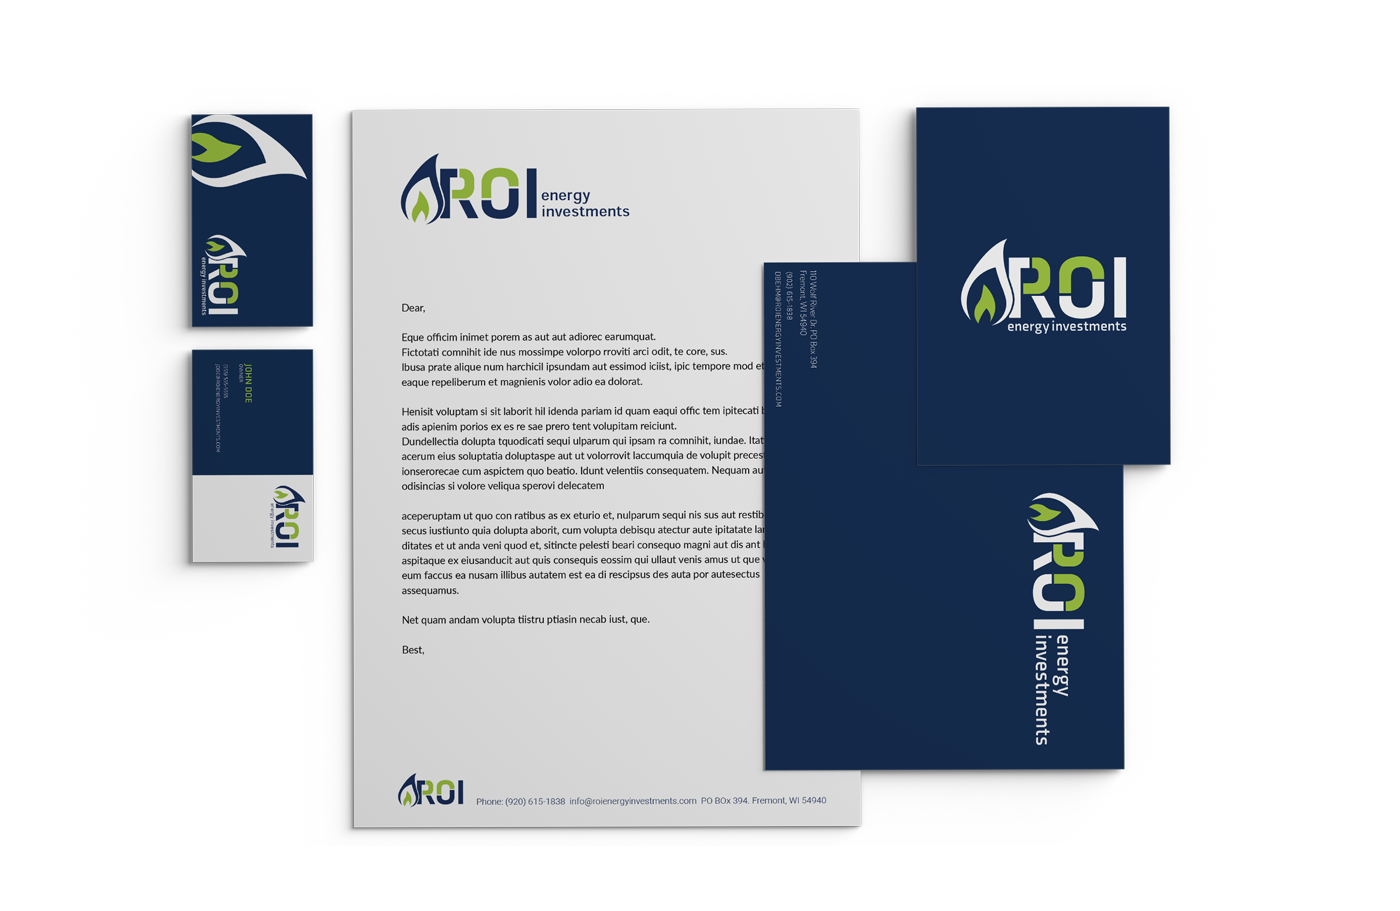 Mockup of branding materials for ROI Energy Investments